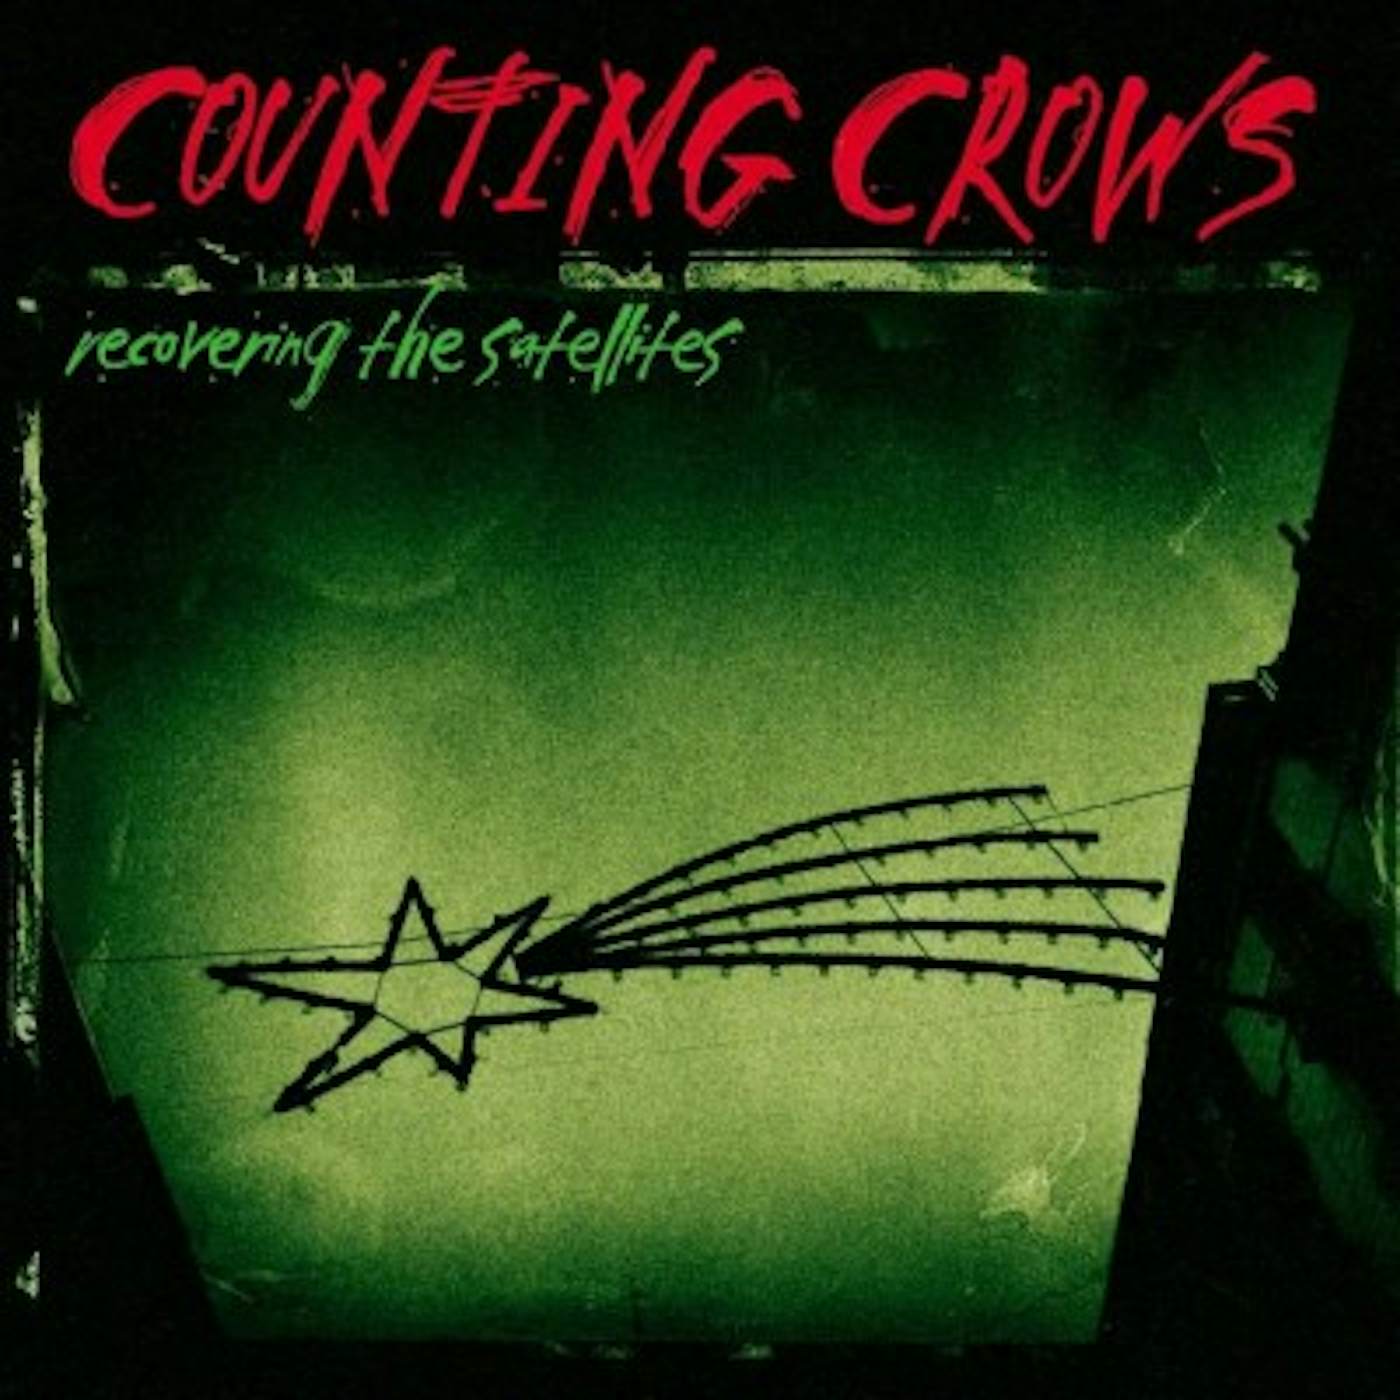 Counting Crows Recovering The Satellites Vinyl Record